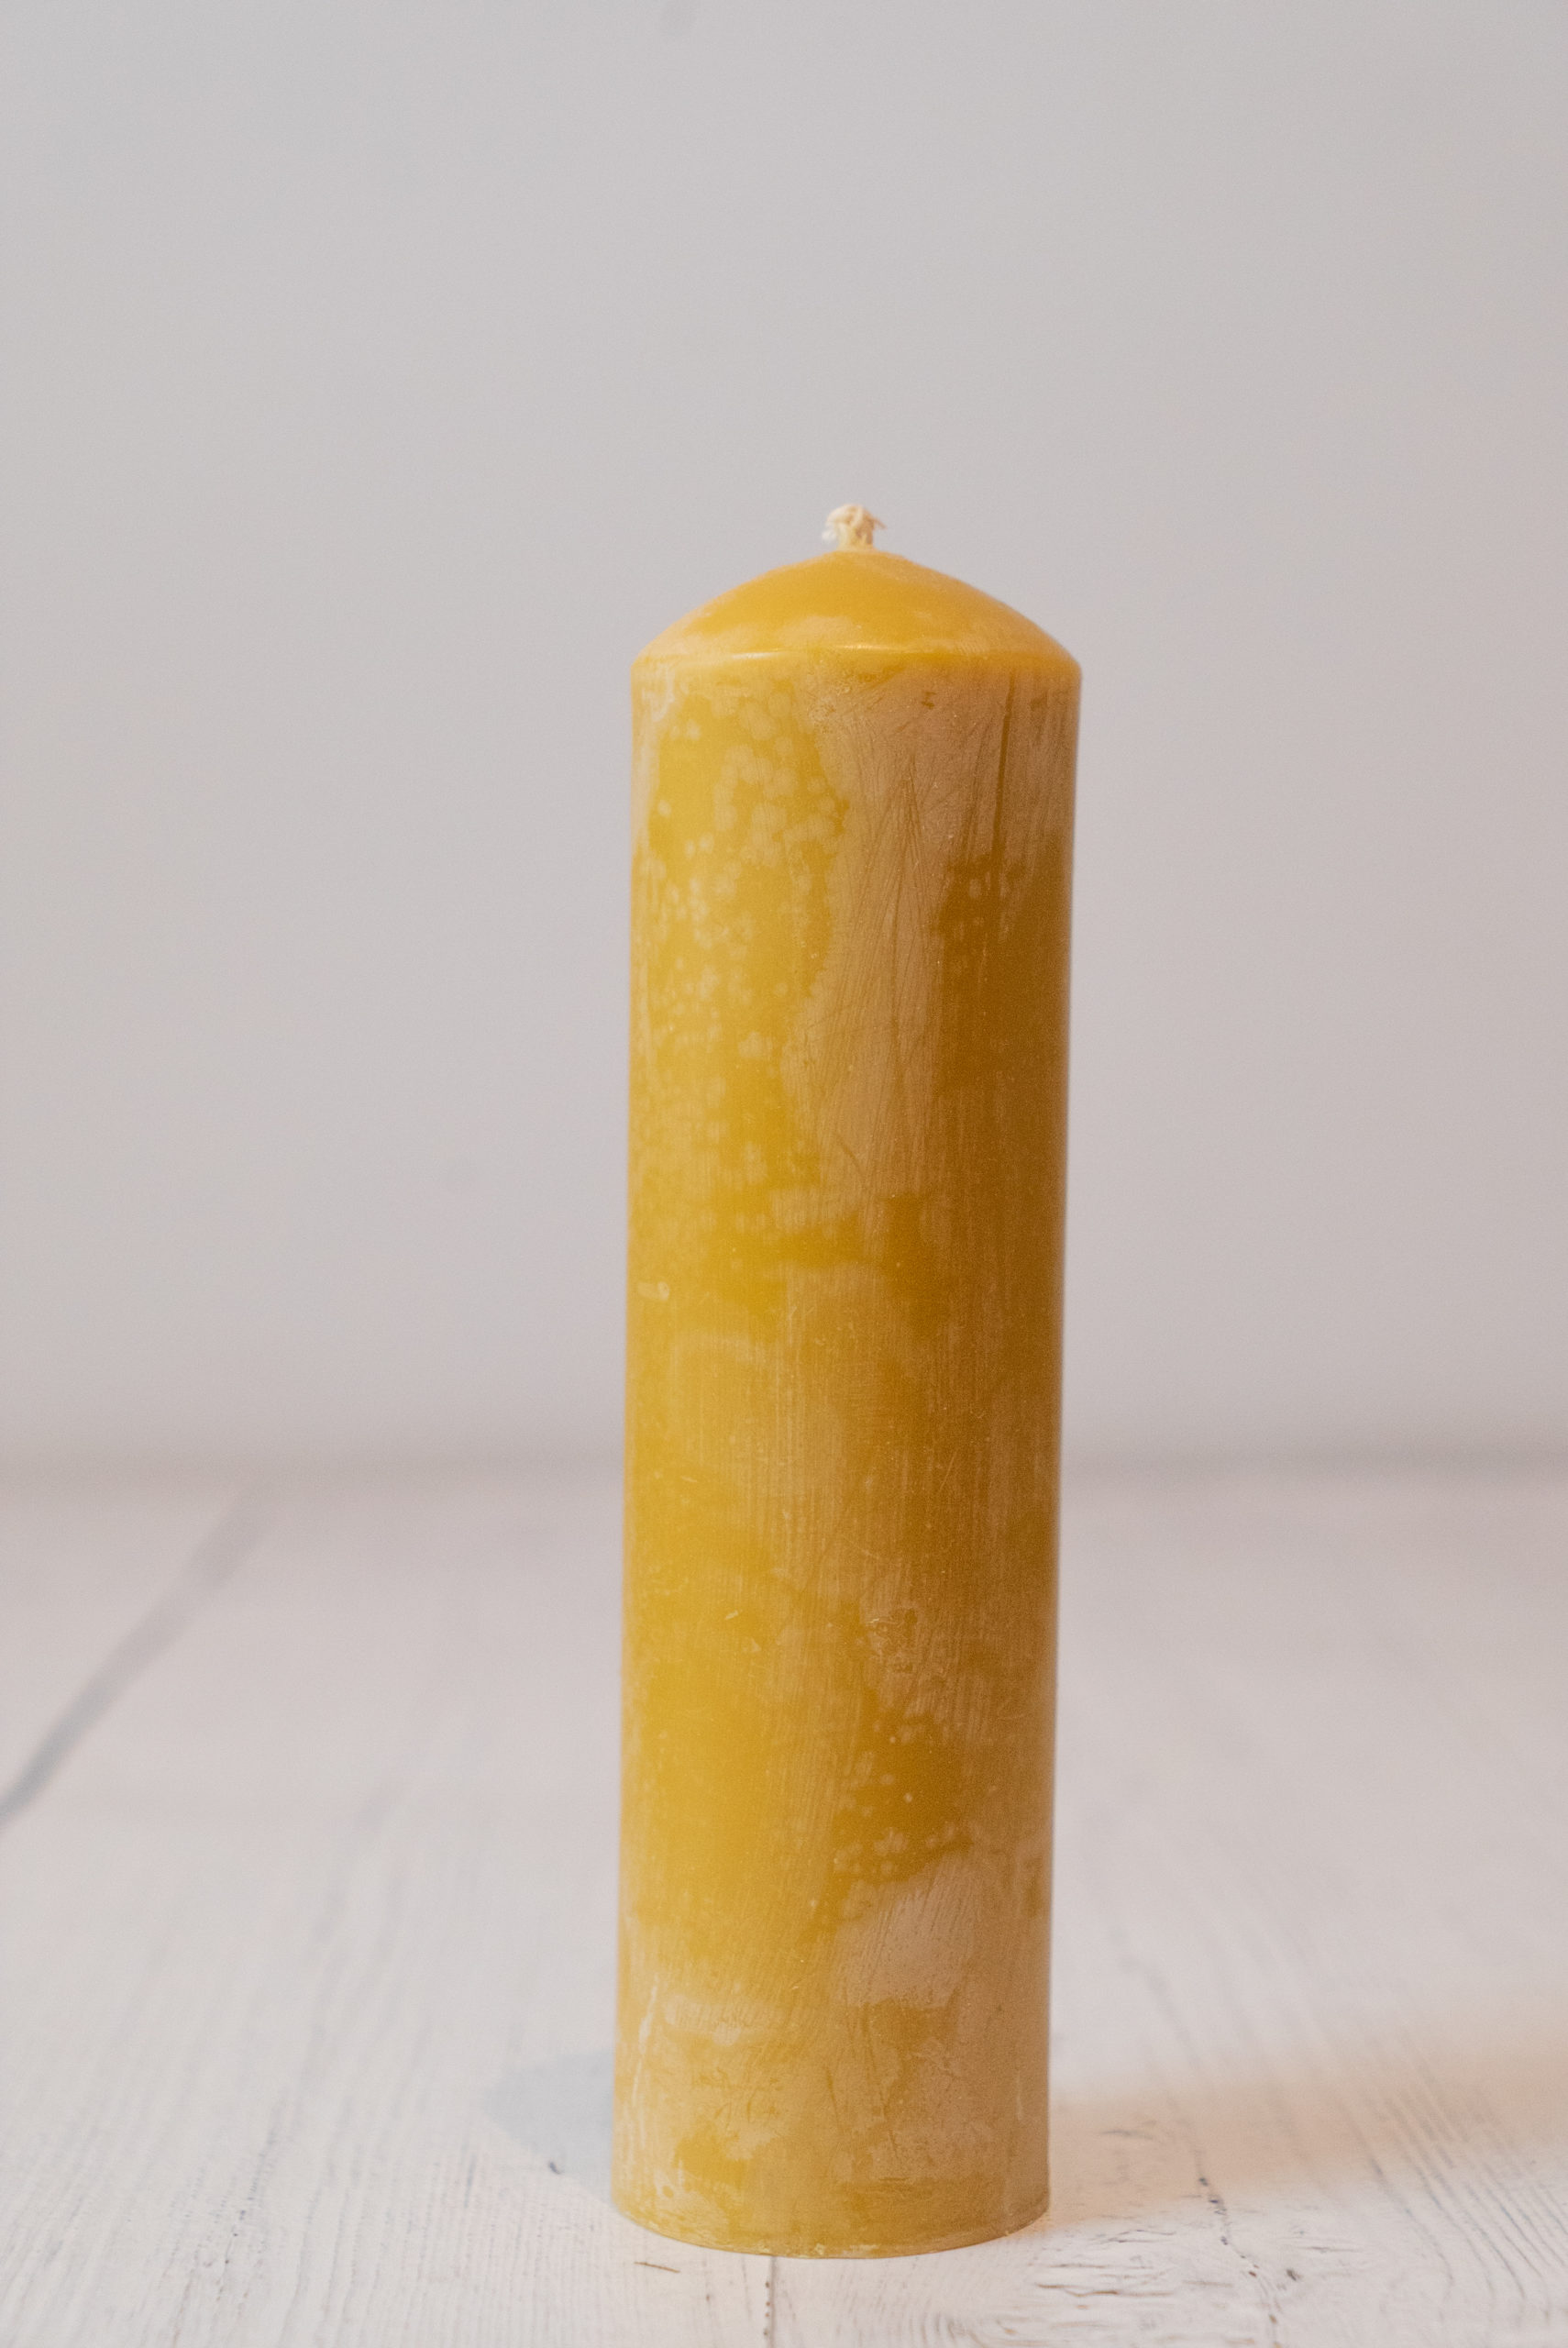 What Makes Beeswax Candles so Great? 